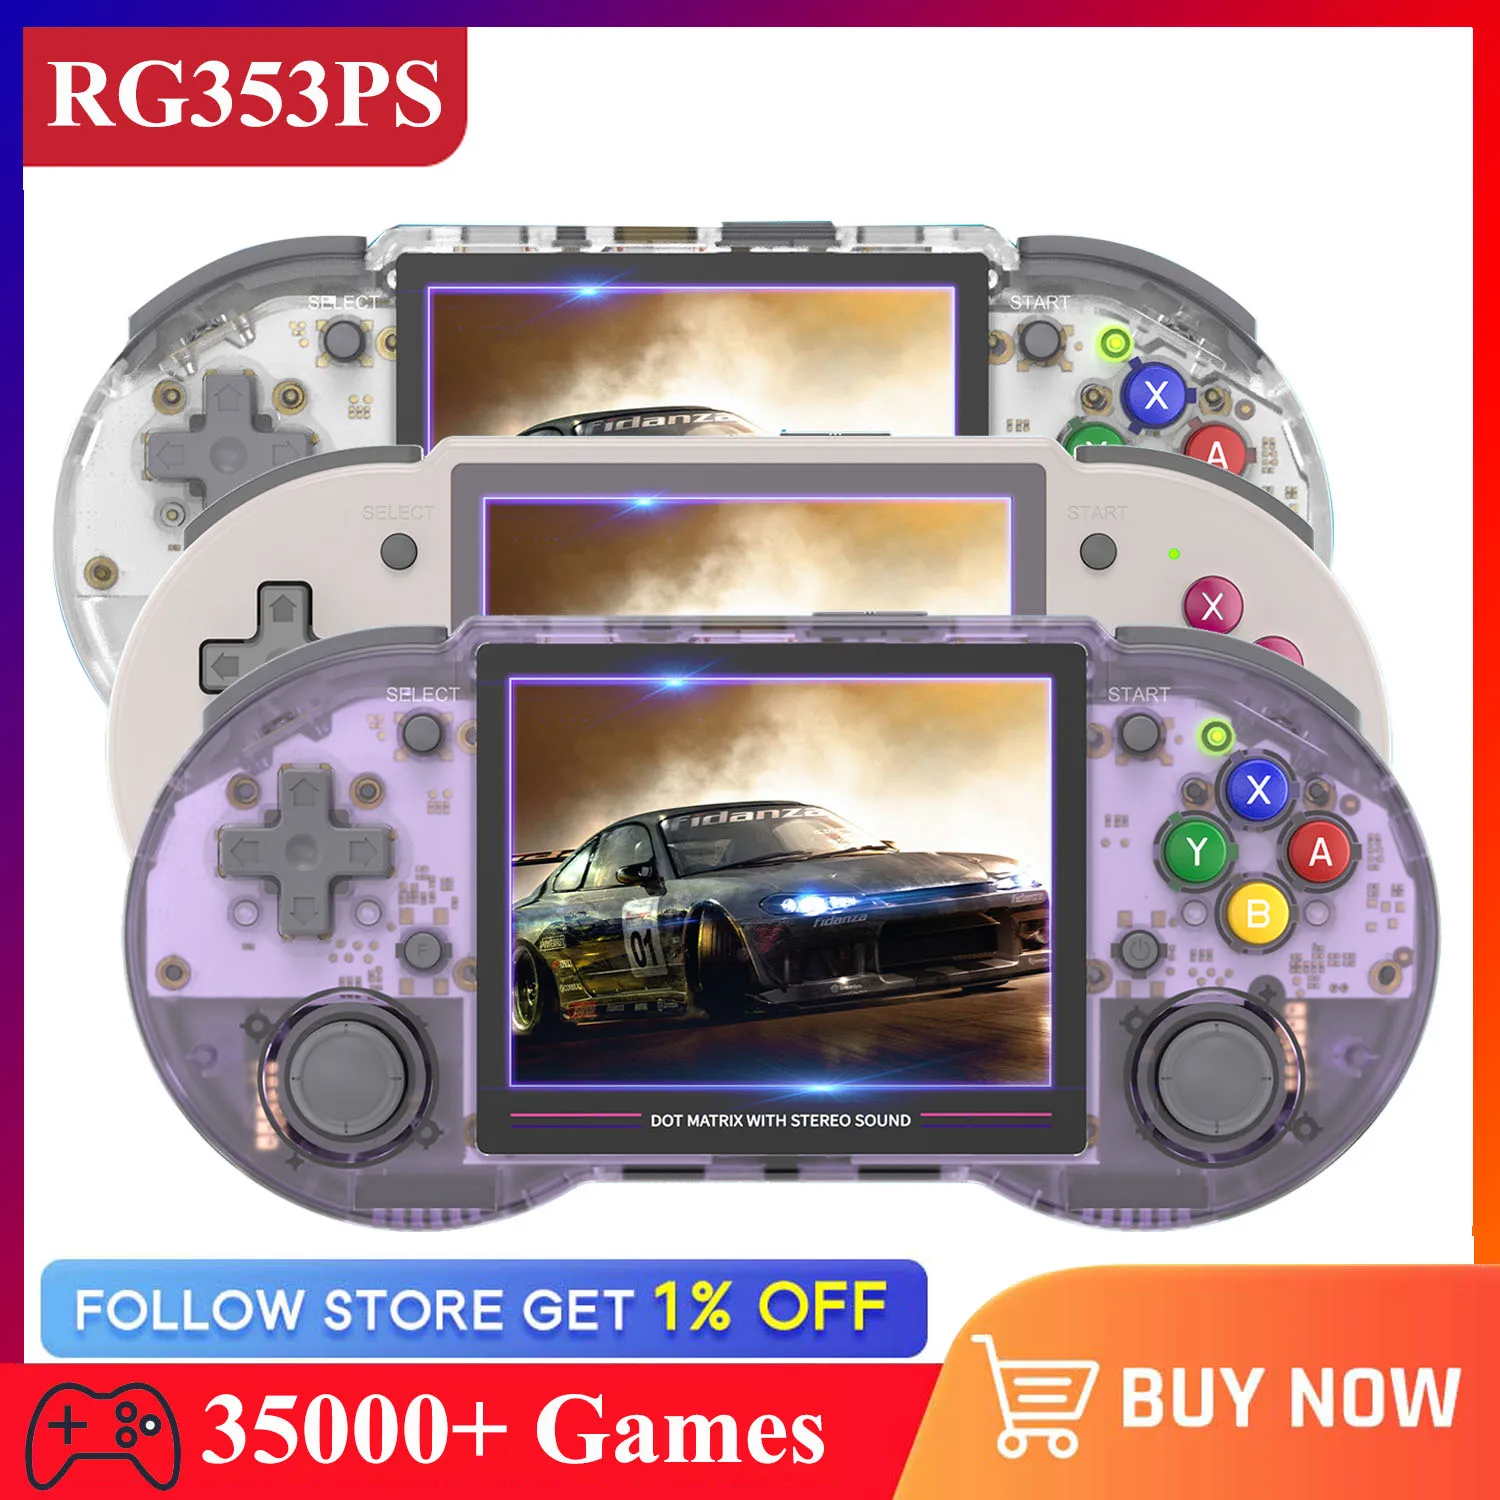 

ANBERNIC RG353PS Retro Handheld Game Console RK3566 3.5 INCH IPS LINUX WIFI Bluetooth Video HD Player 512G 80000 Games Psp Ps1